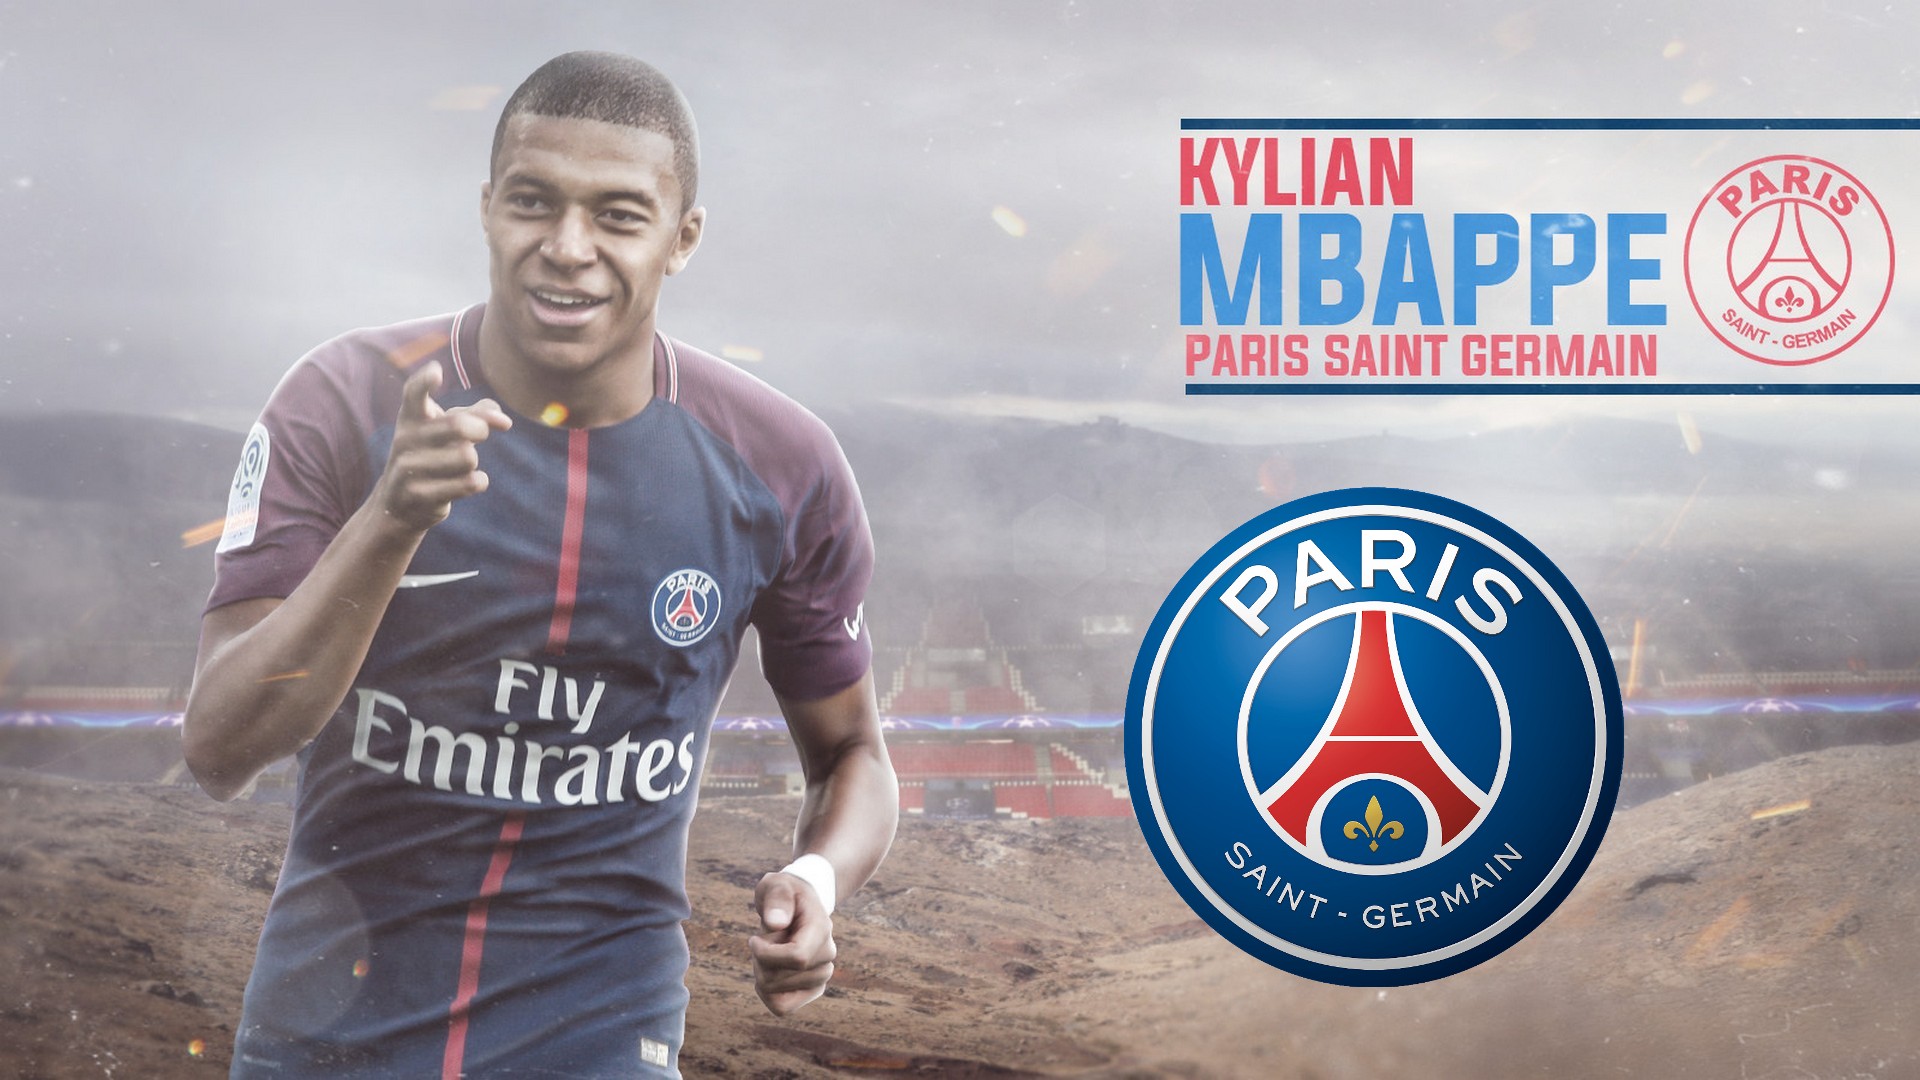 HD Kylian Mbappe PSG Backgrounds with resolution 1920x1080 pixel. You can make this wallpaper for your Mac or Windows Desktop Background, iPhone, Android or Tablet and another Smartphone device